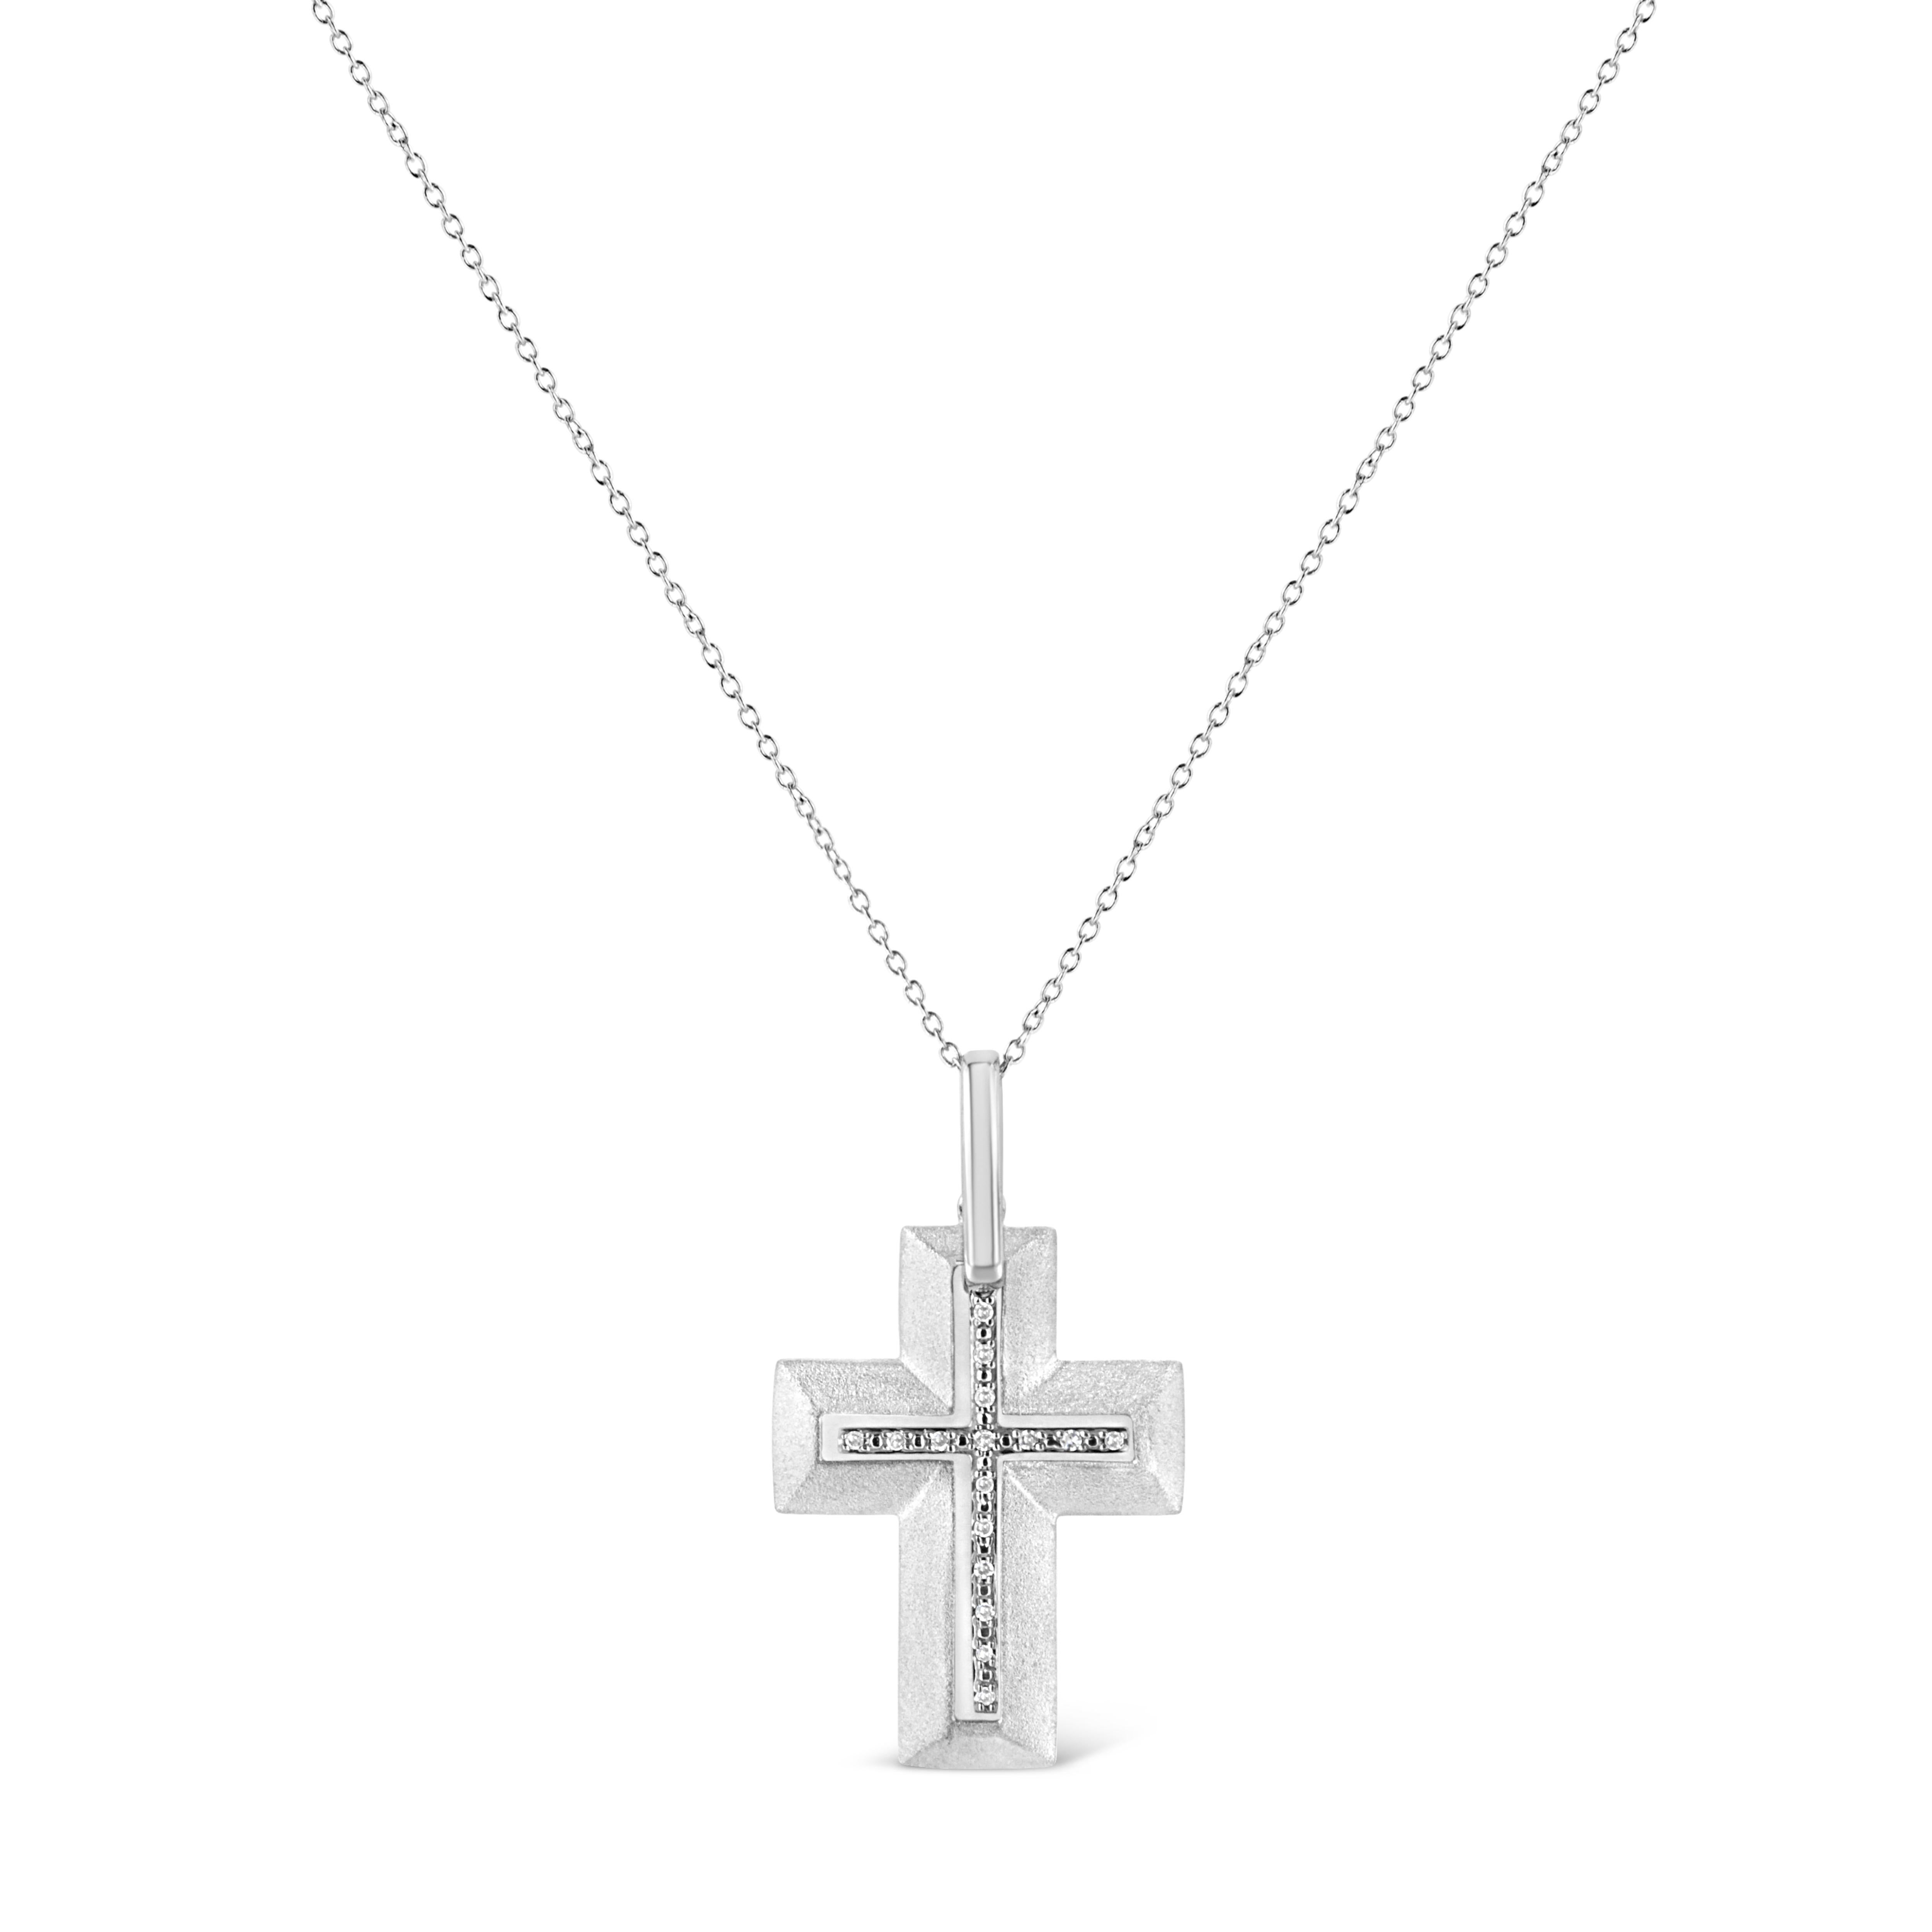 This lovely diamond cross pendant combines spirituality with femininity. Gleaming sterling silver pendant is adorned with 16 prong set radiant single cut diamonds arranged around the cross. It dangles from a elegant cable chain. Total diamond weight